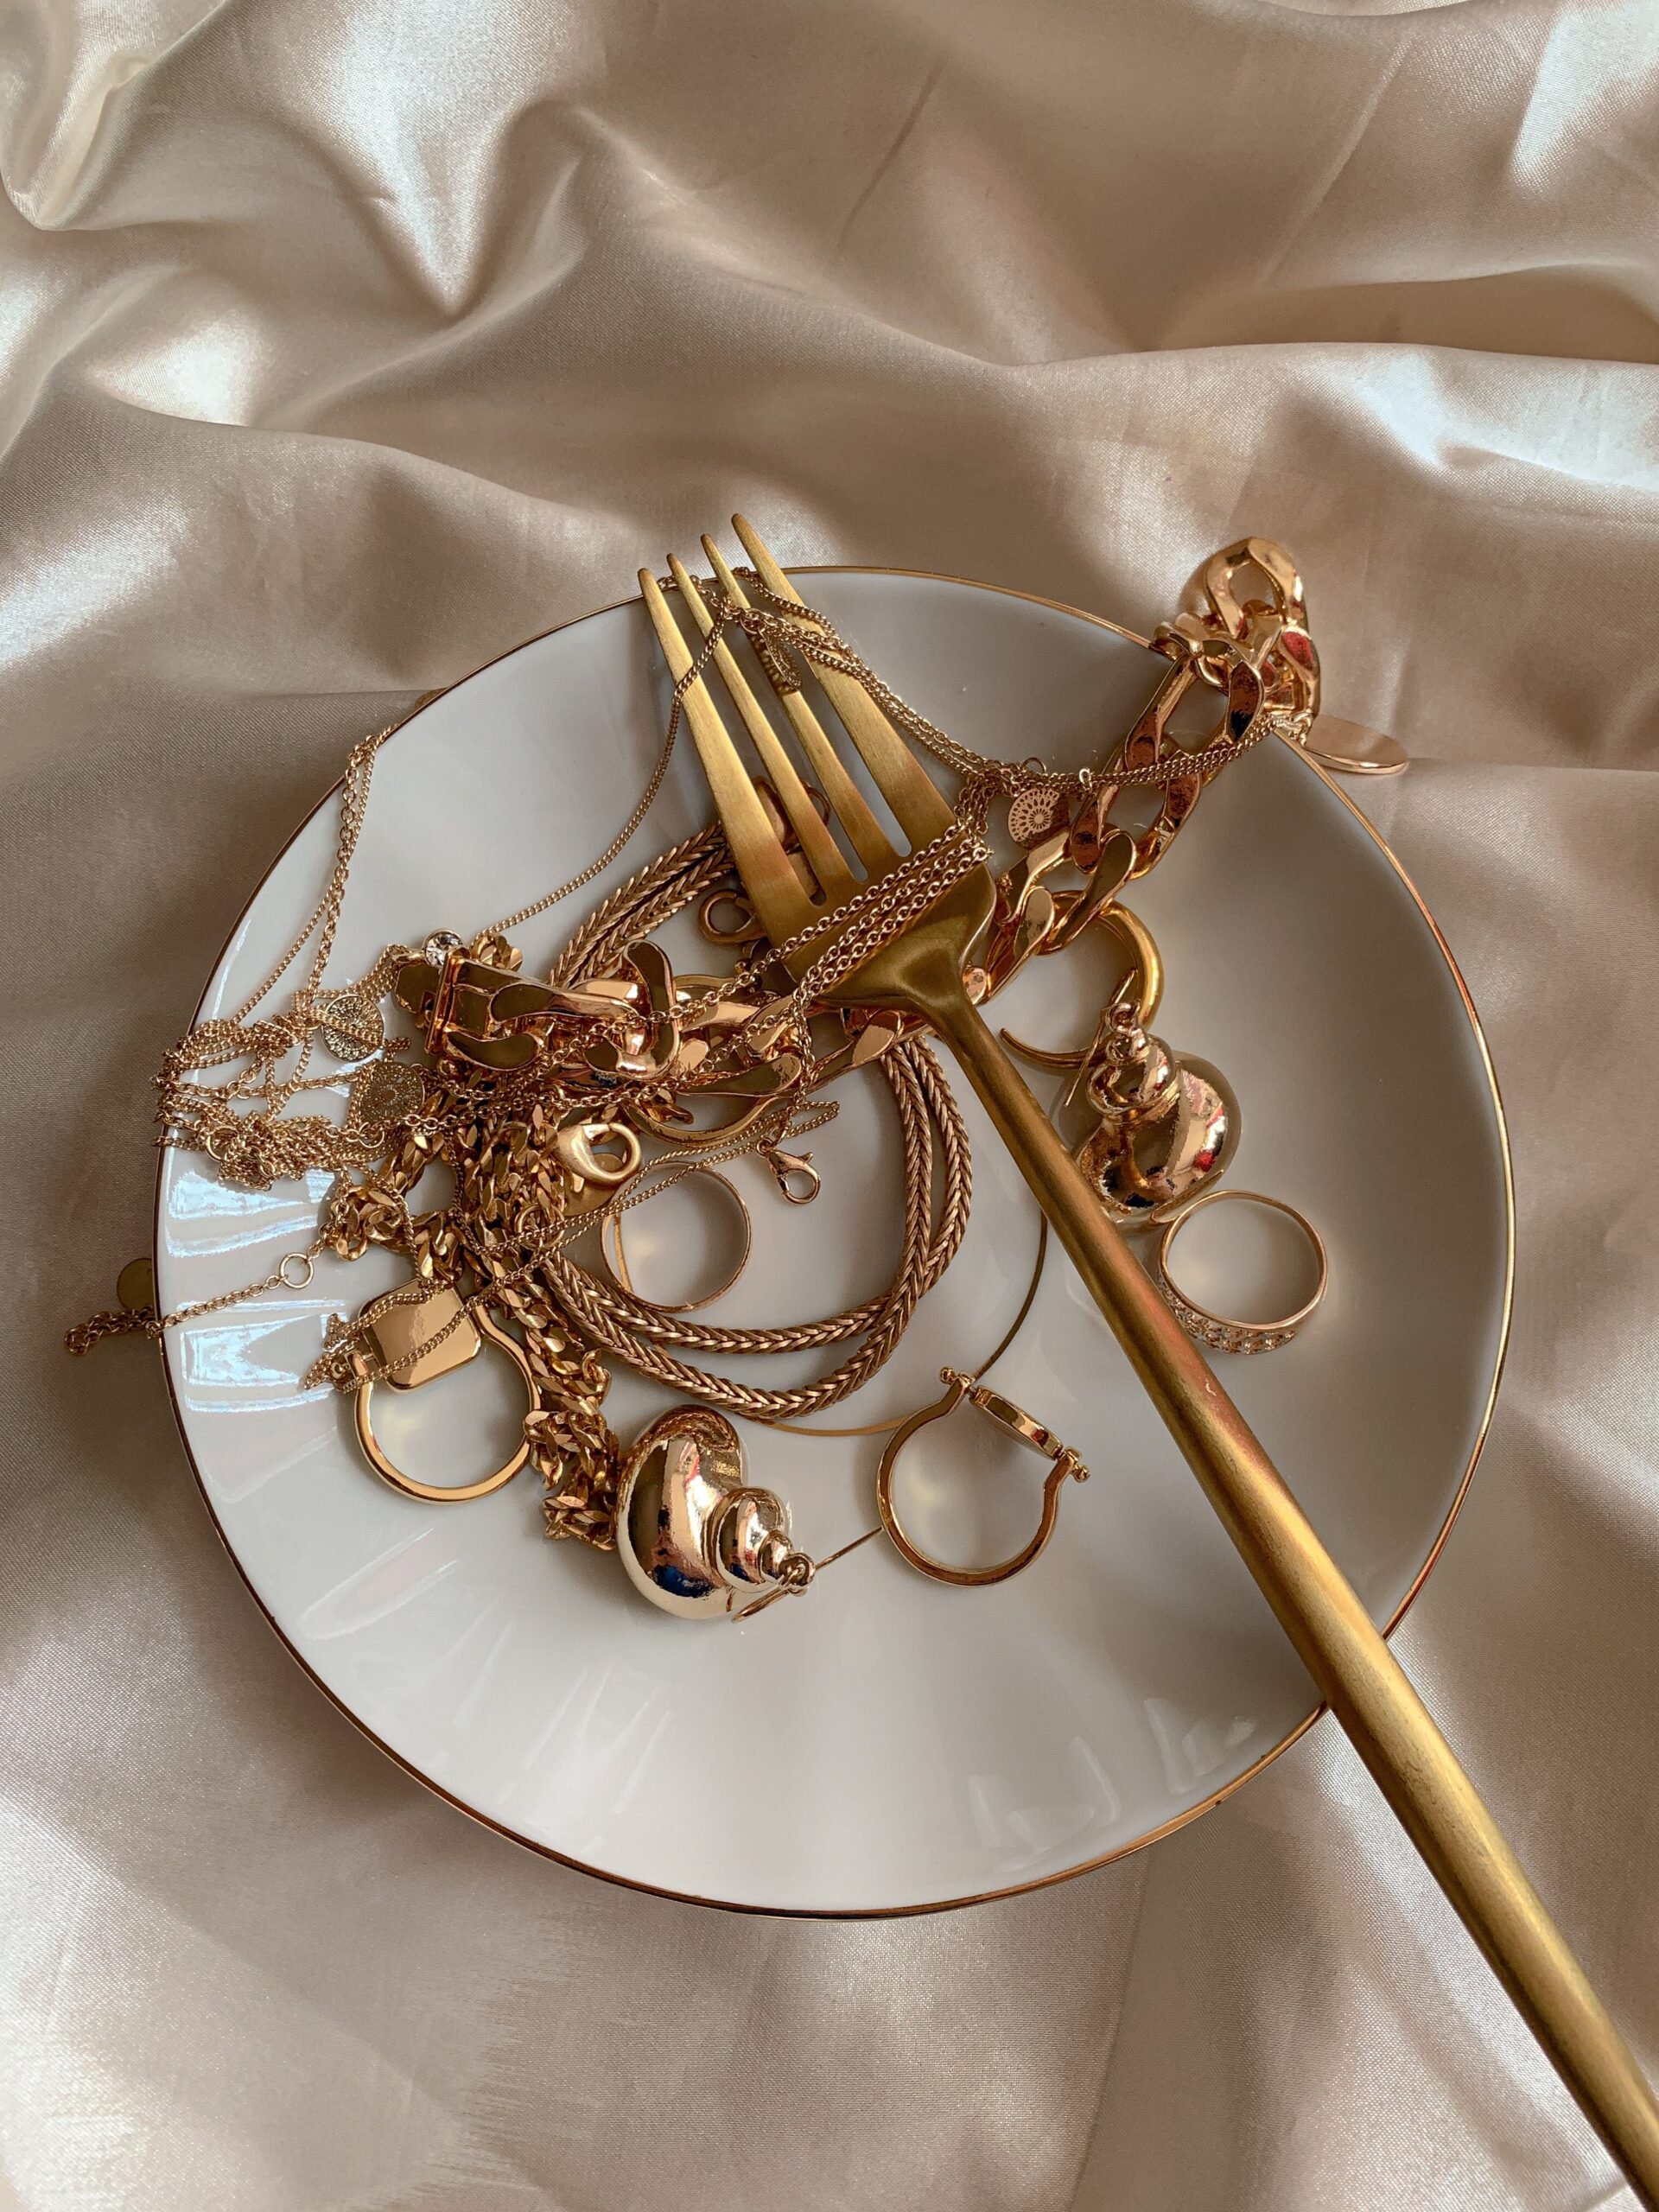 Golden Jewelry and Golden Fork on White Saucer on Beige Silk